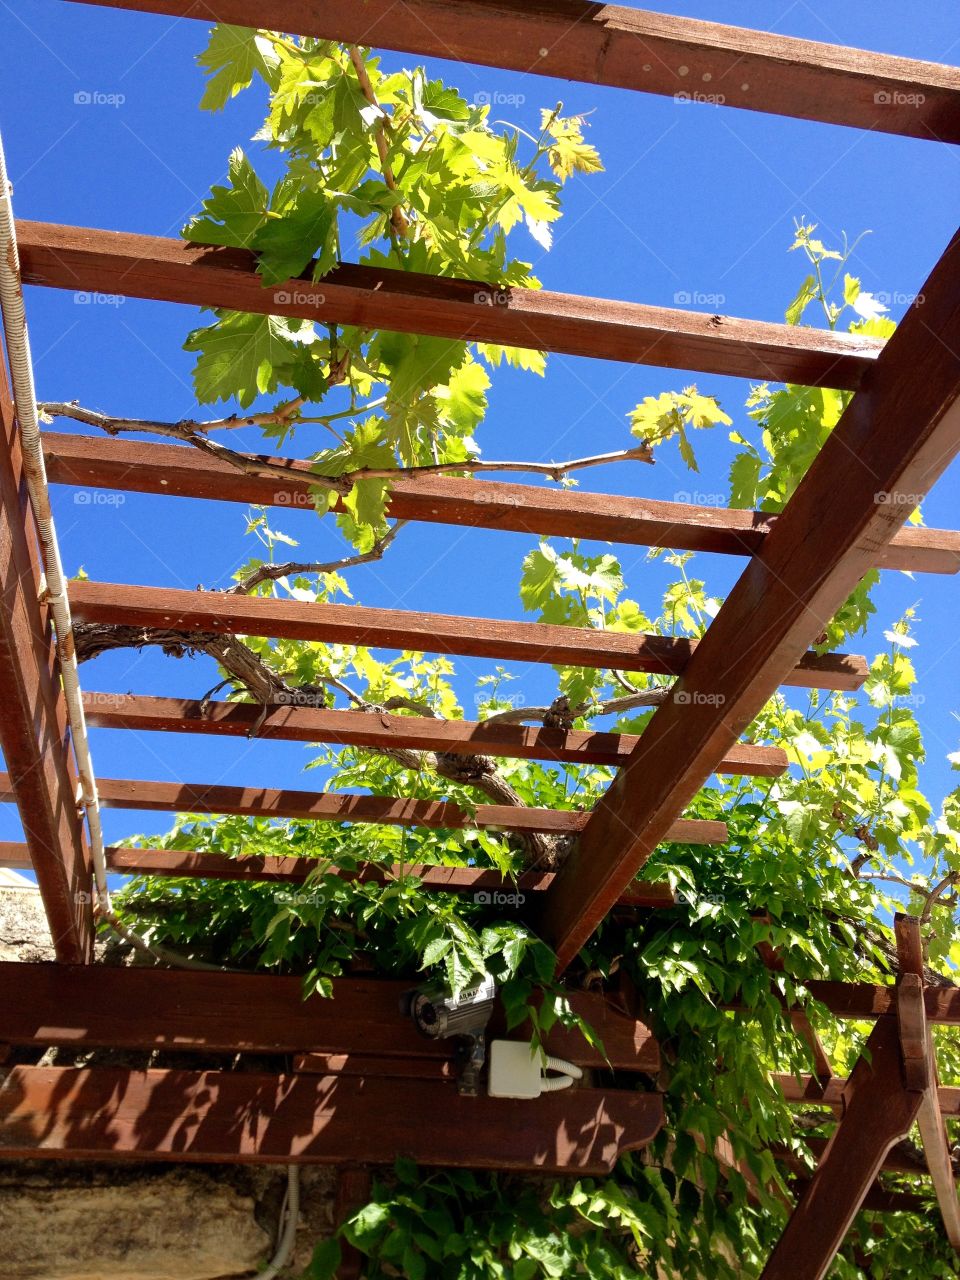 Grape vines on a sunny day in Greece